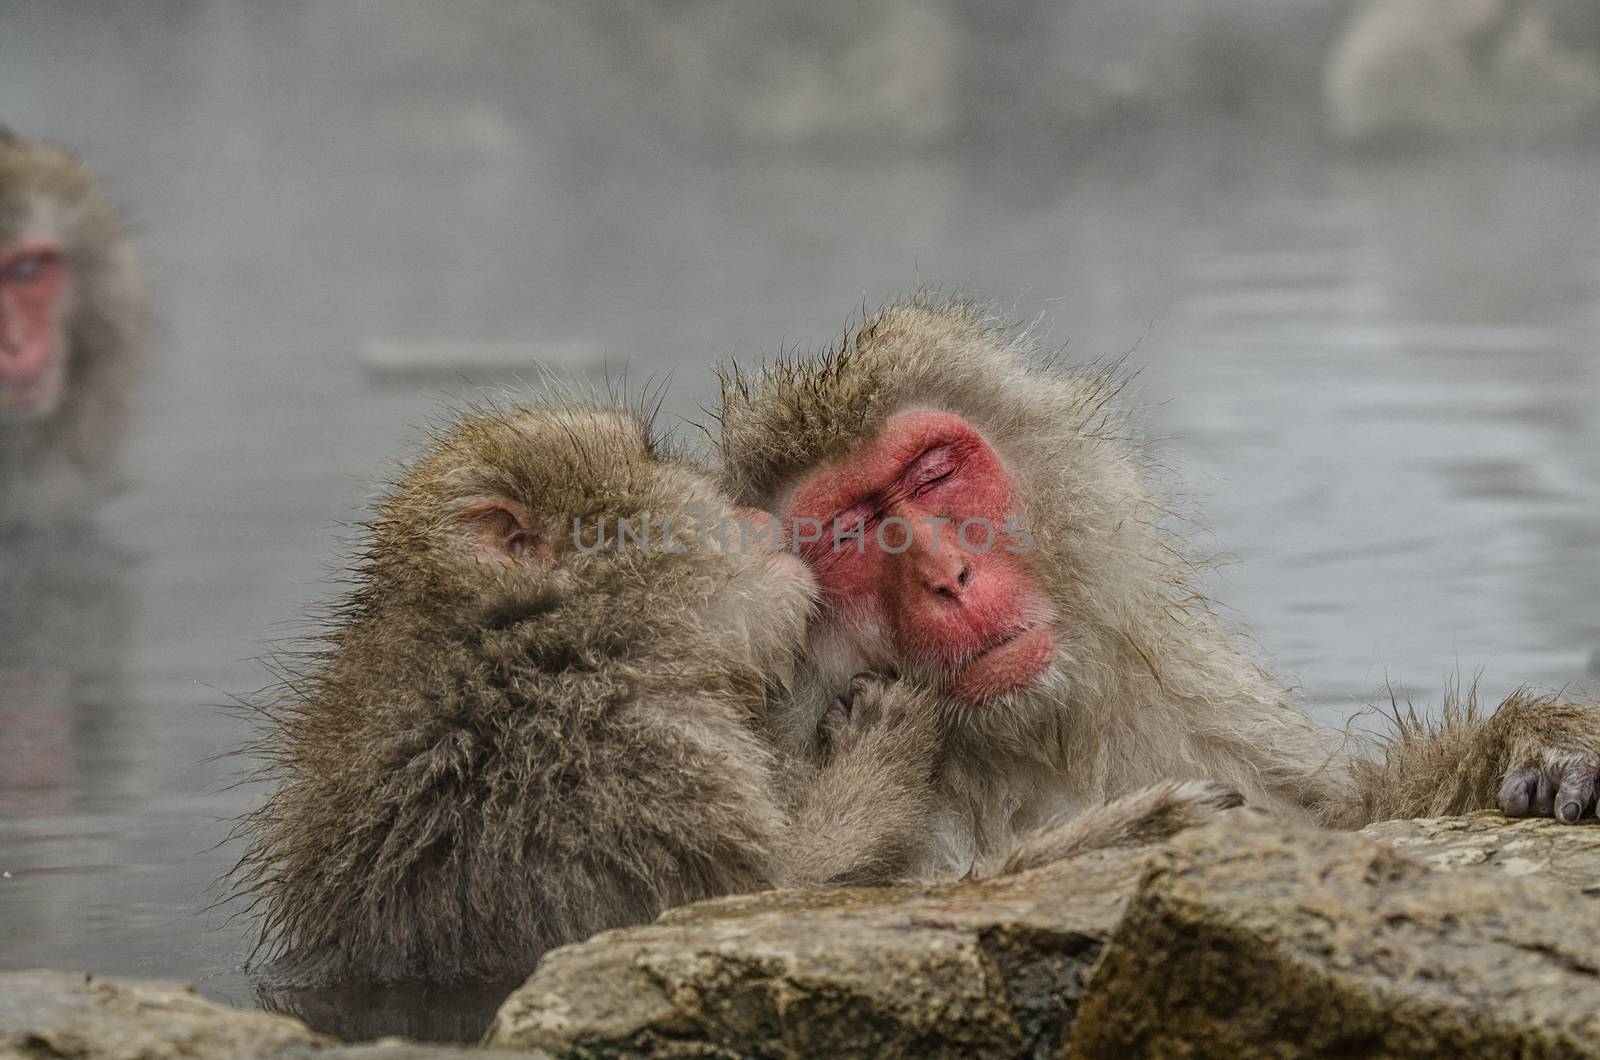 Japanese Snow monkey Macaque in hot spring Onsen Jigokudan Park, by chanwity